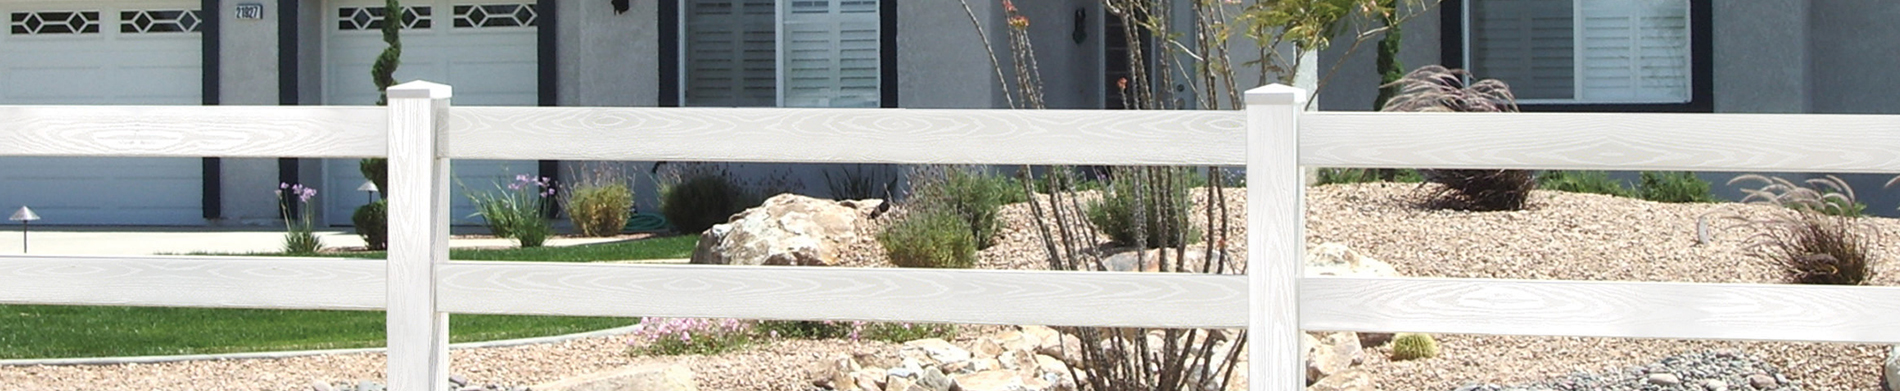 Adding a stylish and sophisticated vinyl rail ranch fence to your yard from Duramax